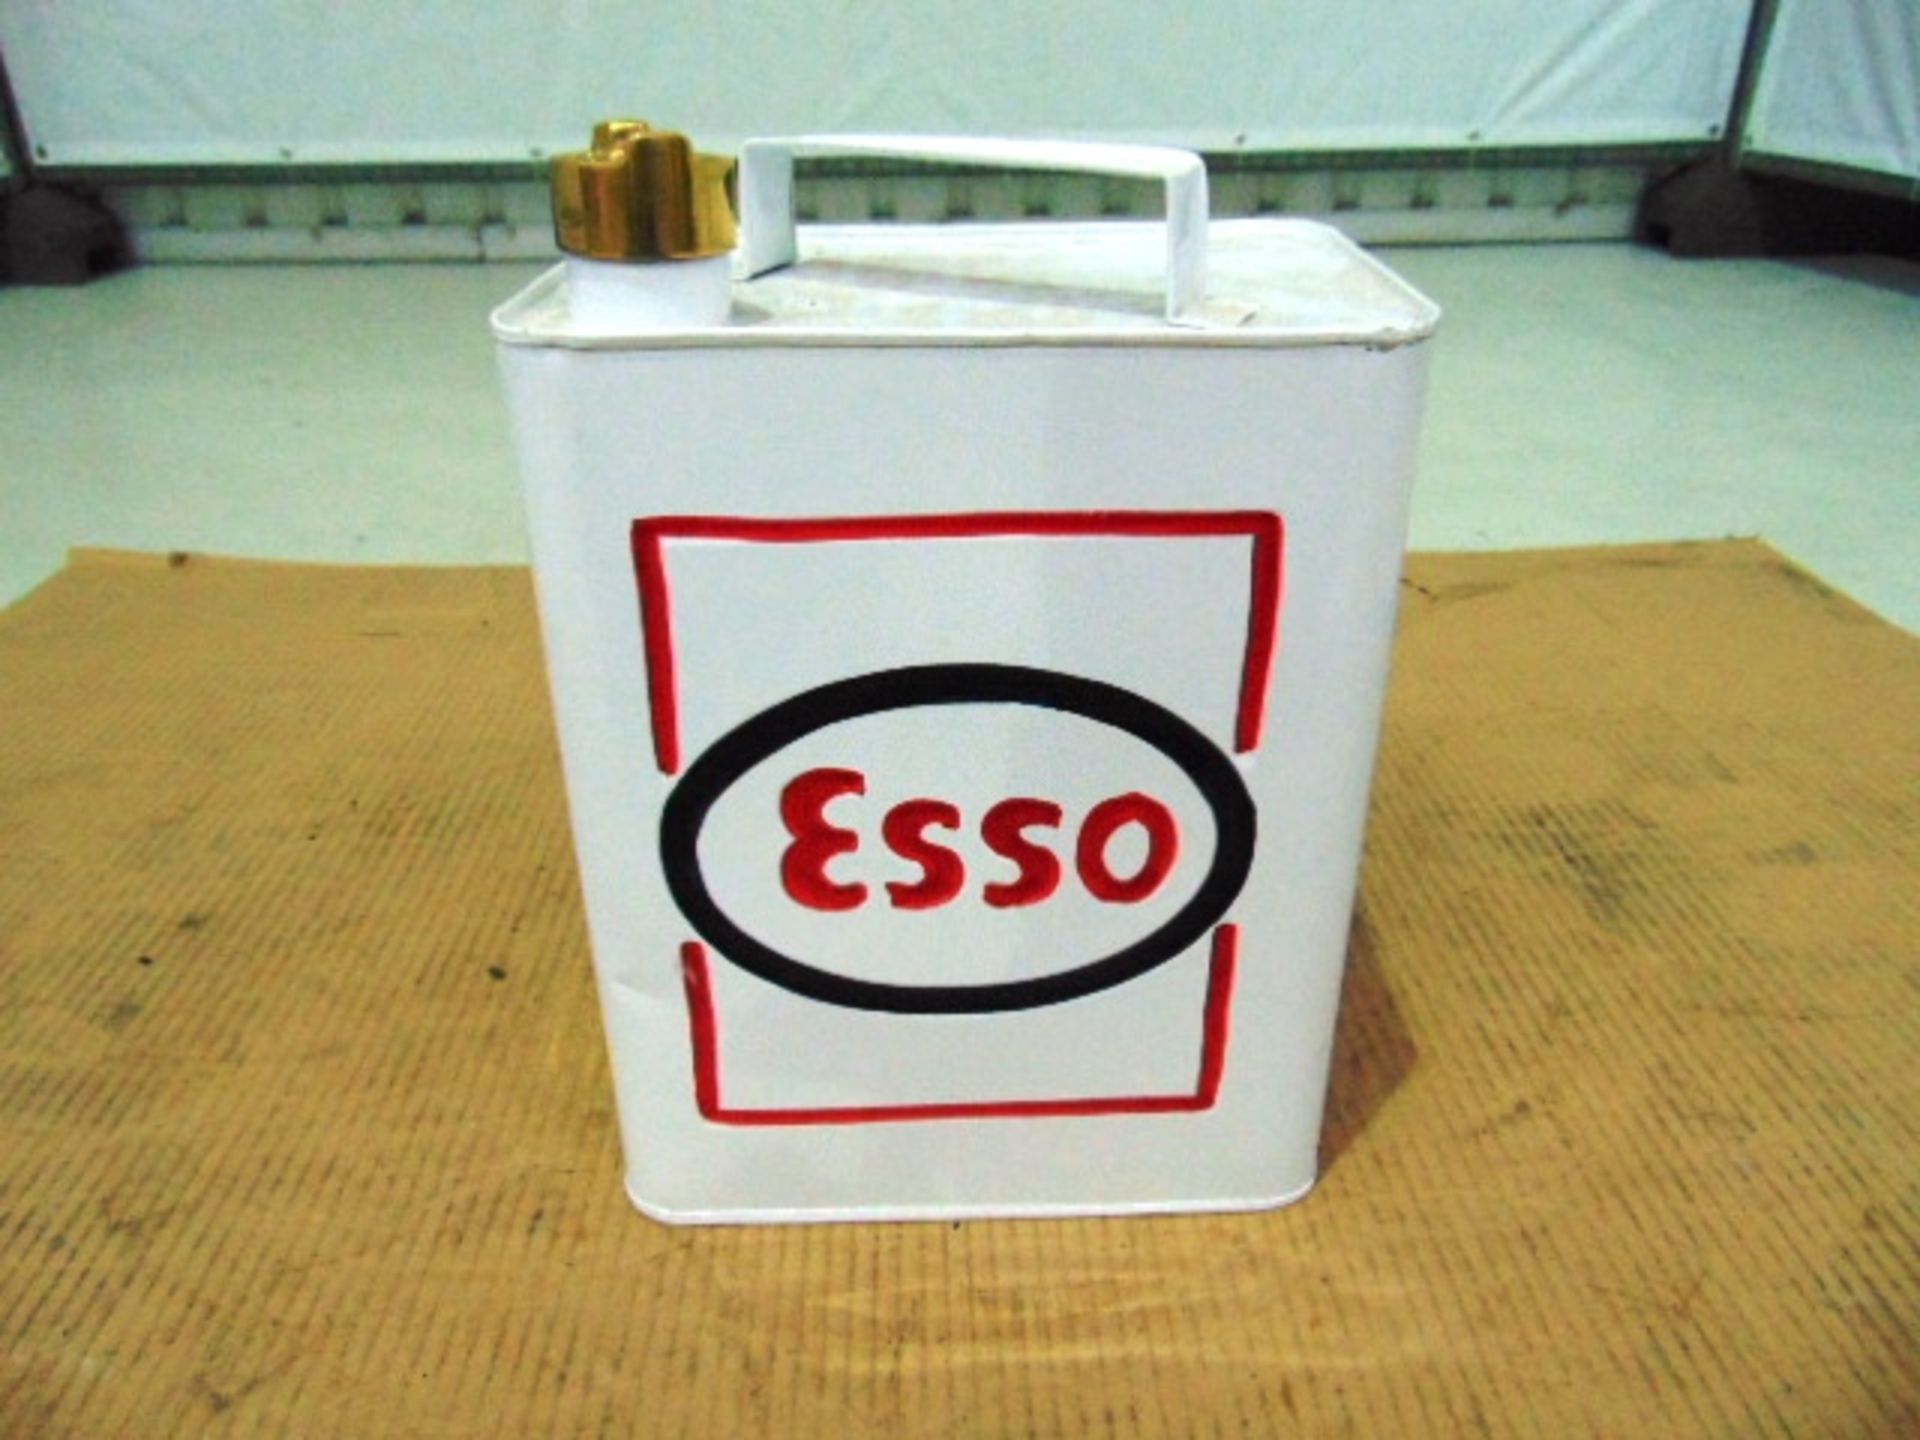 Esso Branded Oil Can